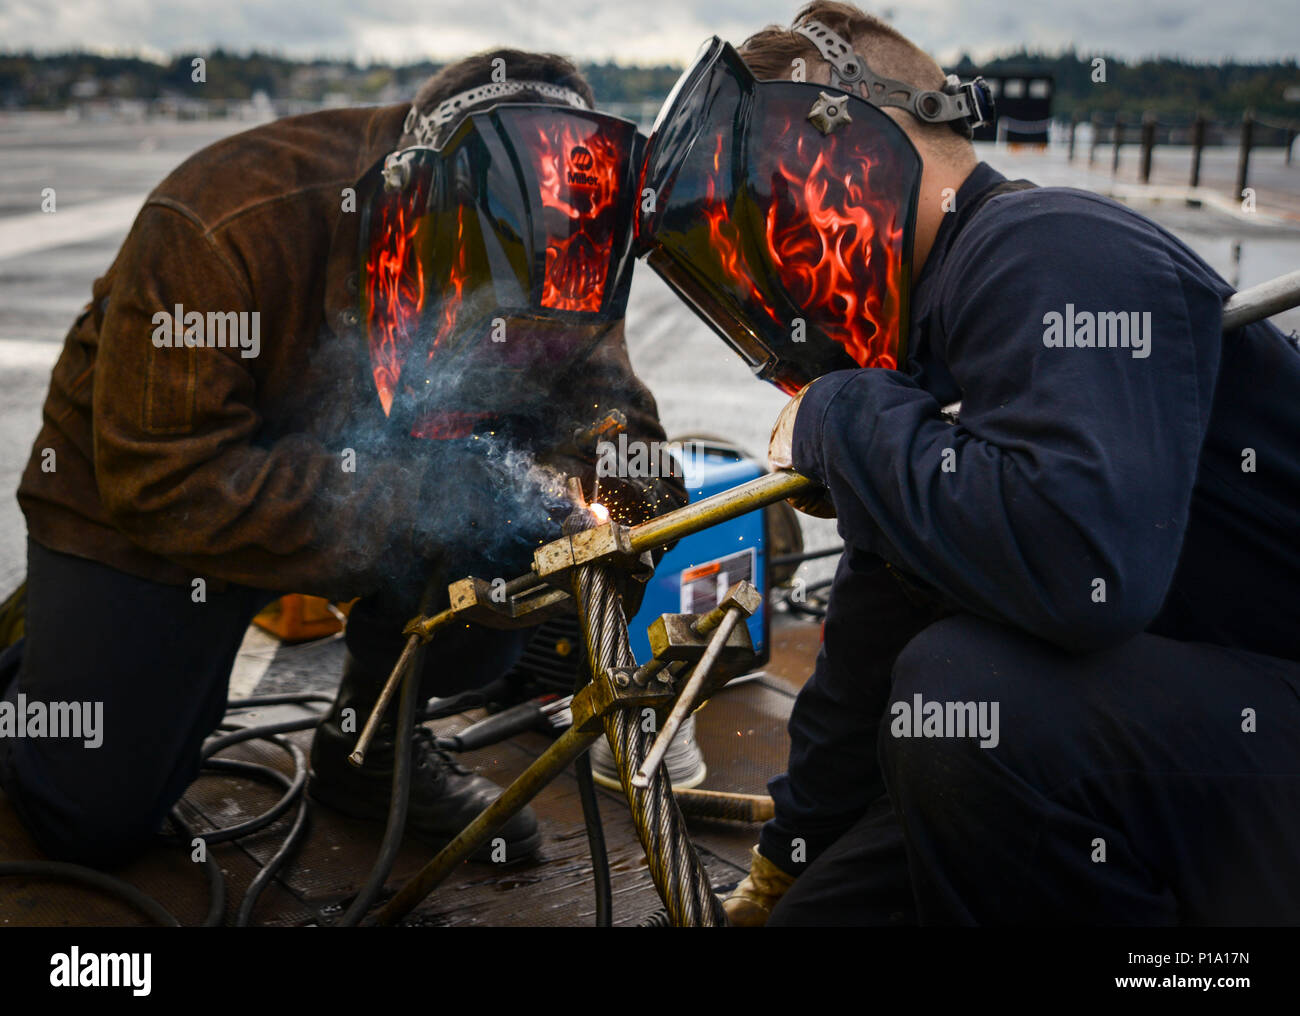 NAVAL BASE KITSAP-BREMERTON, Wash. (Oct. 2, 2016) - Seaman Chase Ethridge (right), a native of Katy, Texas, steadies an arresting cable while Petty Officer 3rd Class Gabriel Moreno, a native of Huntington Beach, Calif., welds during a reweave of the arresting gear on board USS Nimitz (CVN 68). Nimitz is currently undergoing an extended planned incremental maintenance availability at Puget Sound Naval Shipyard and Intermediate Maintenance Facility where the ship is receiving scheduled maintenance and upgrades. (U.S. Navy photo by Petty Officer 3rd Class Samuel Bacon/Released) Stock Photo